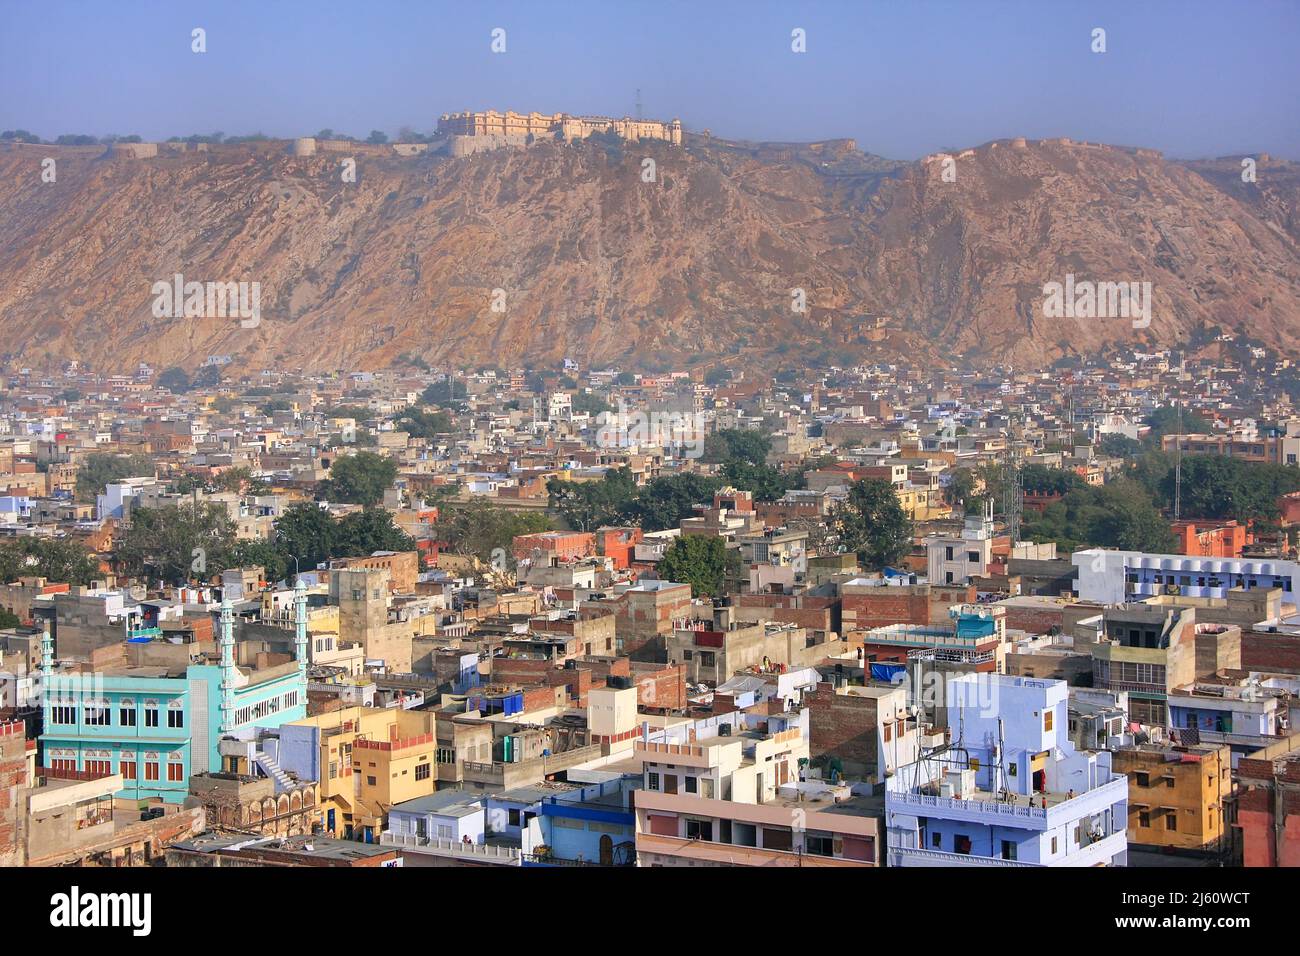 View of Nahargarh Fort and Jaipur city below in Rajasthan, India. The fort was constructed as a place of retreat on the summit of the ridge above the Stock Photo